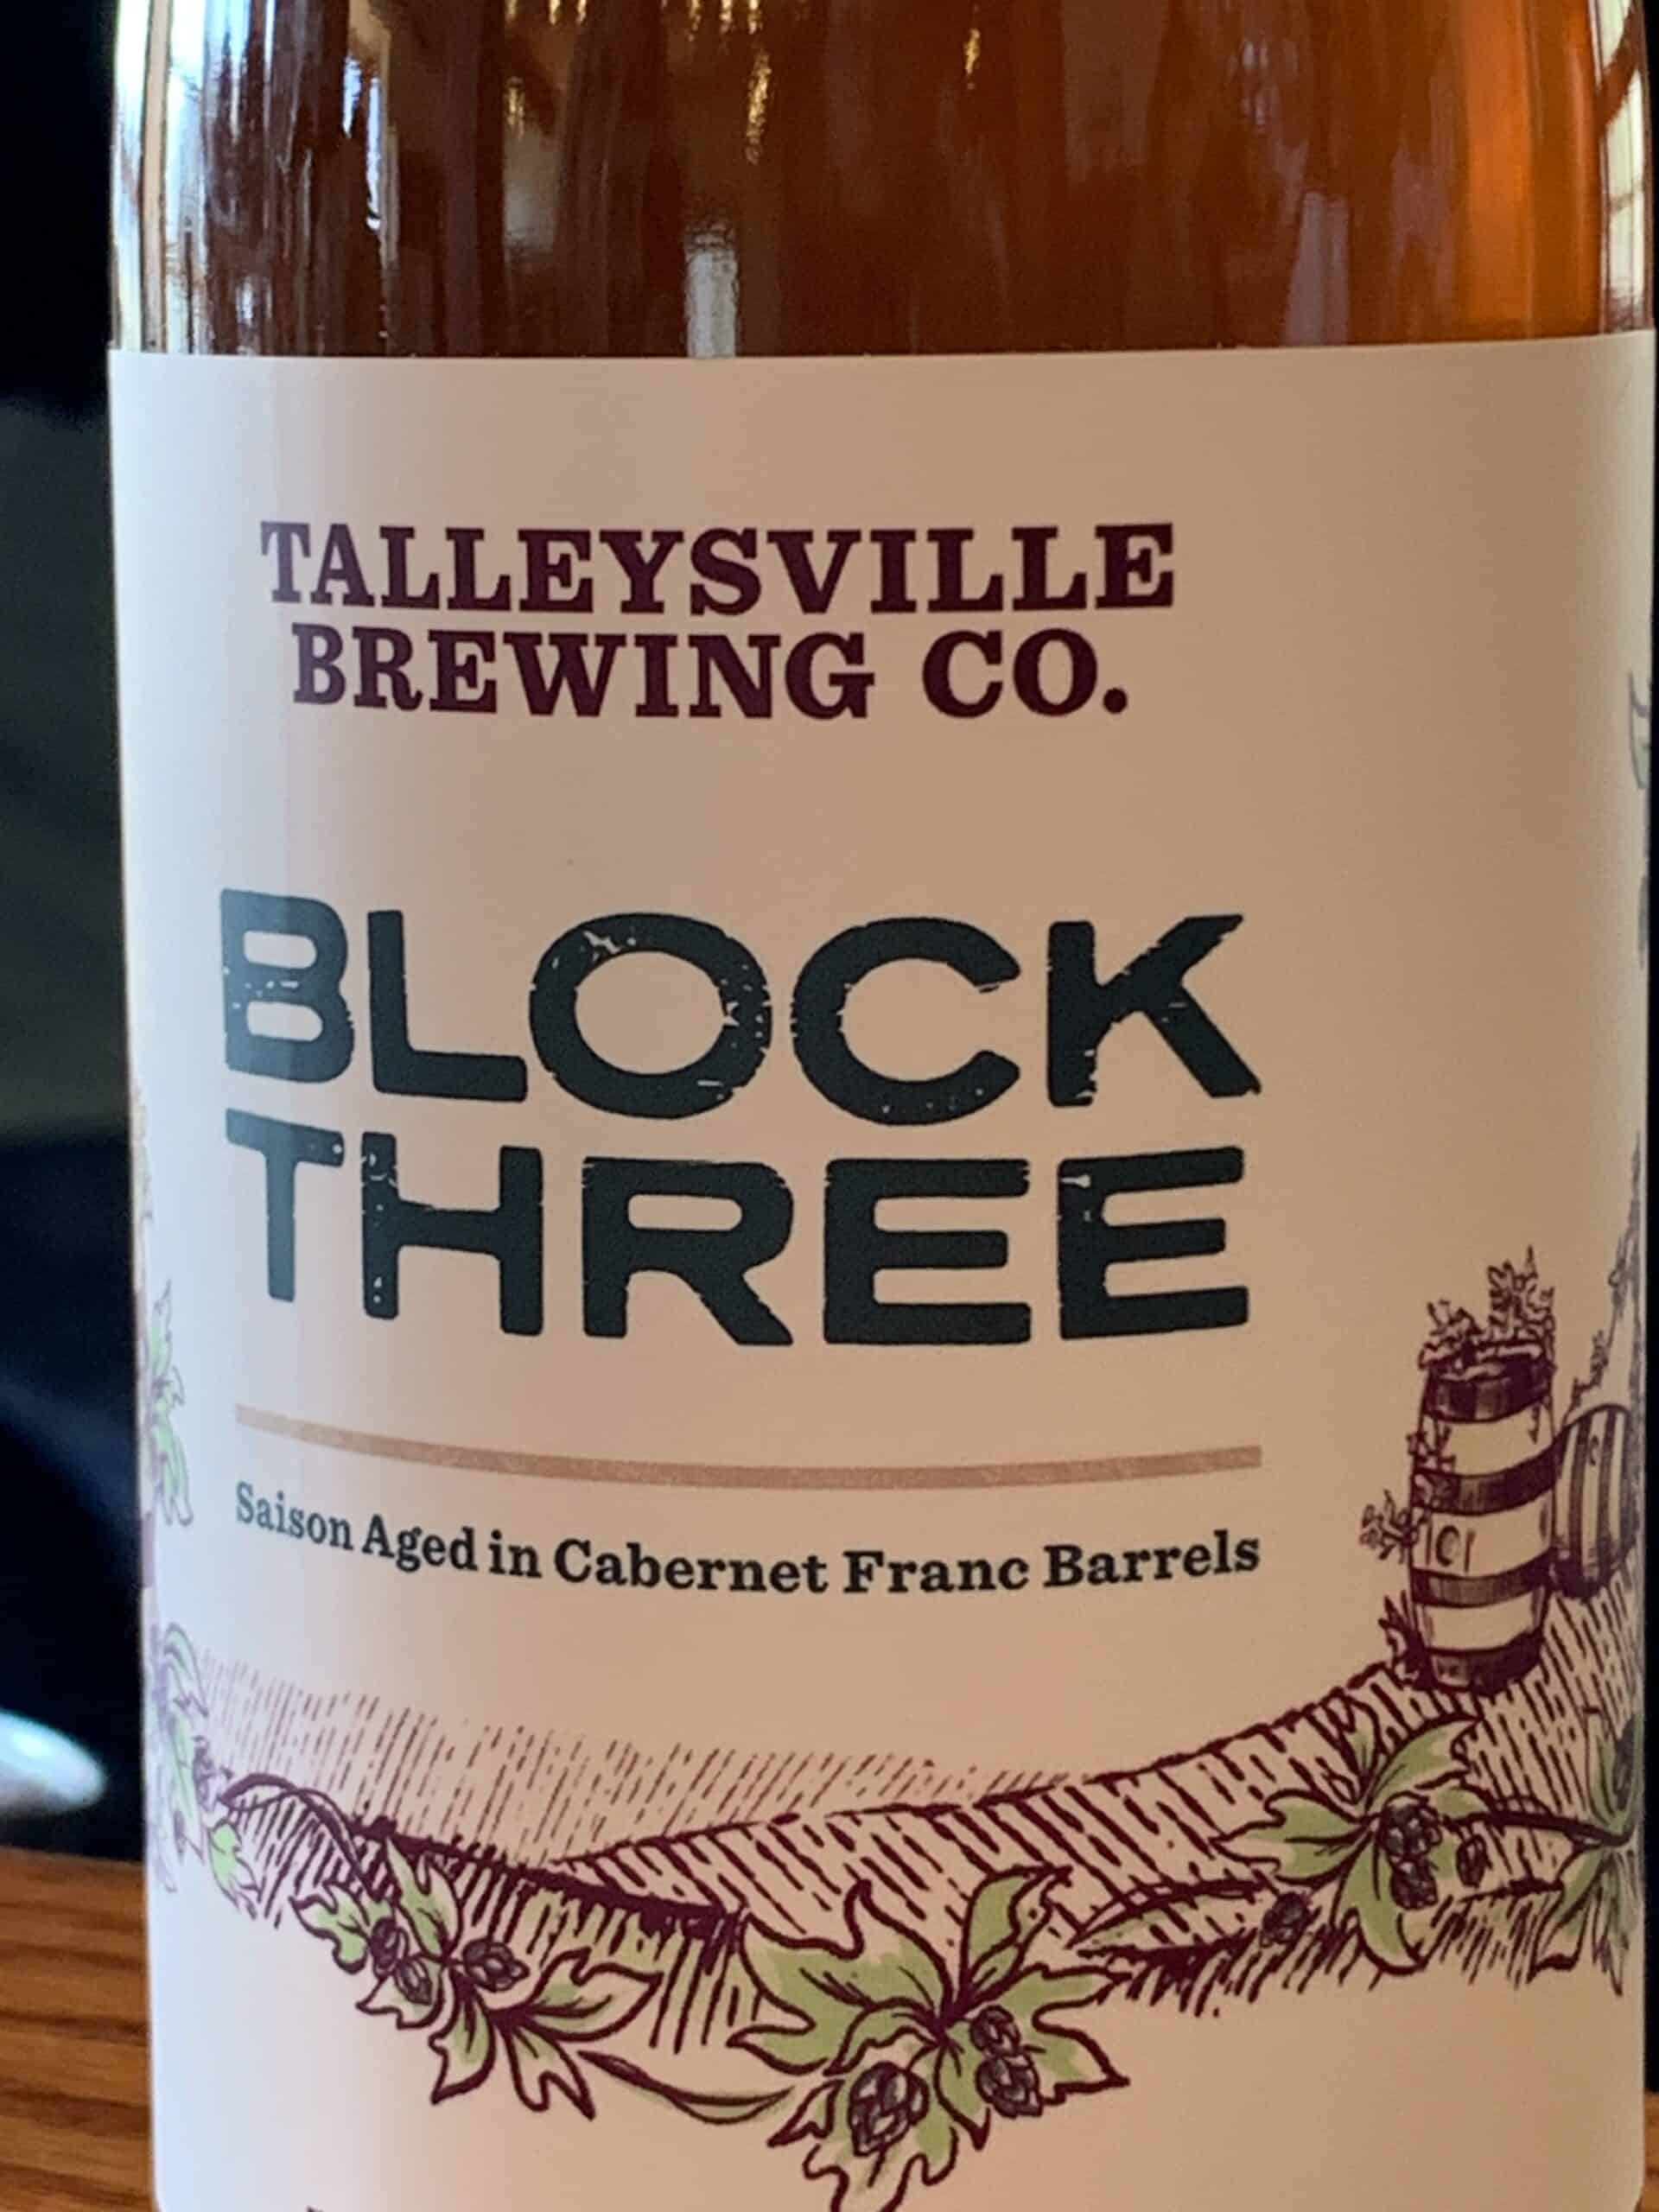 Beer from Talleysville Brewing Co. at New Kent Winery, a saison aged in Cabernet Sauvignon barrels